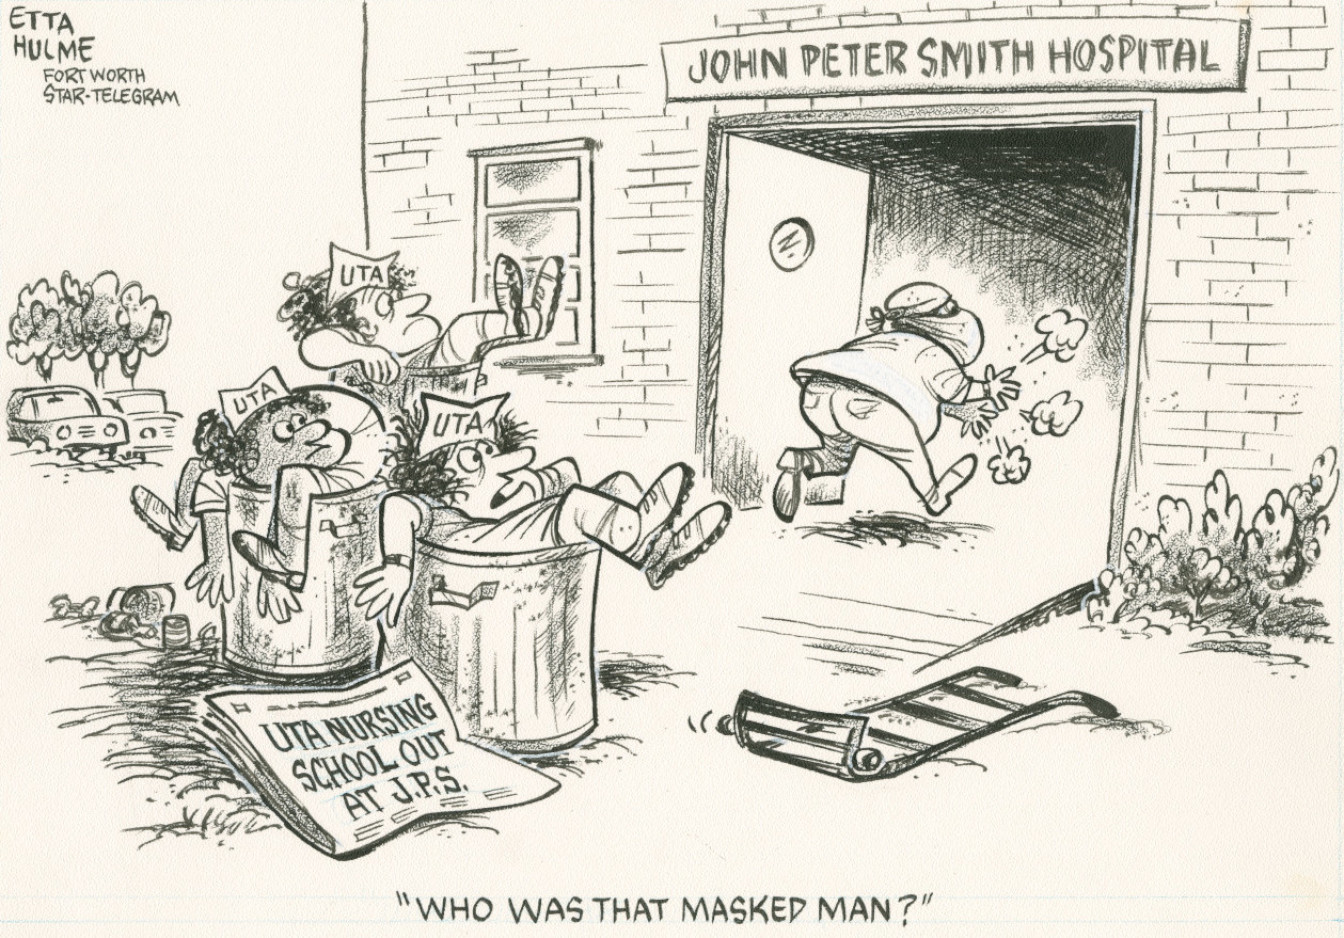 Cartoon depiciting nurses being thrown out in trash cans while a doctor returns back into the hospital.